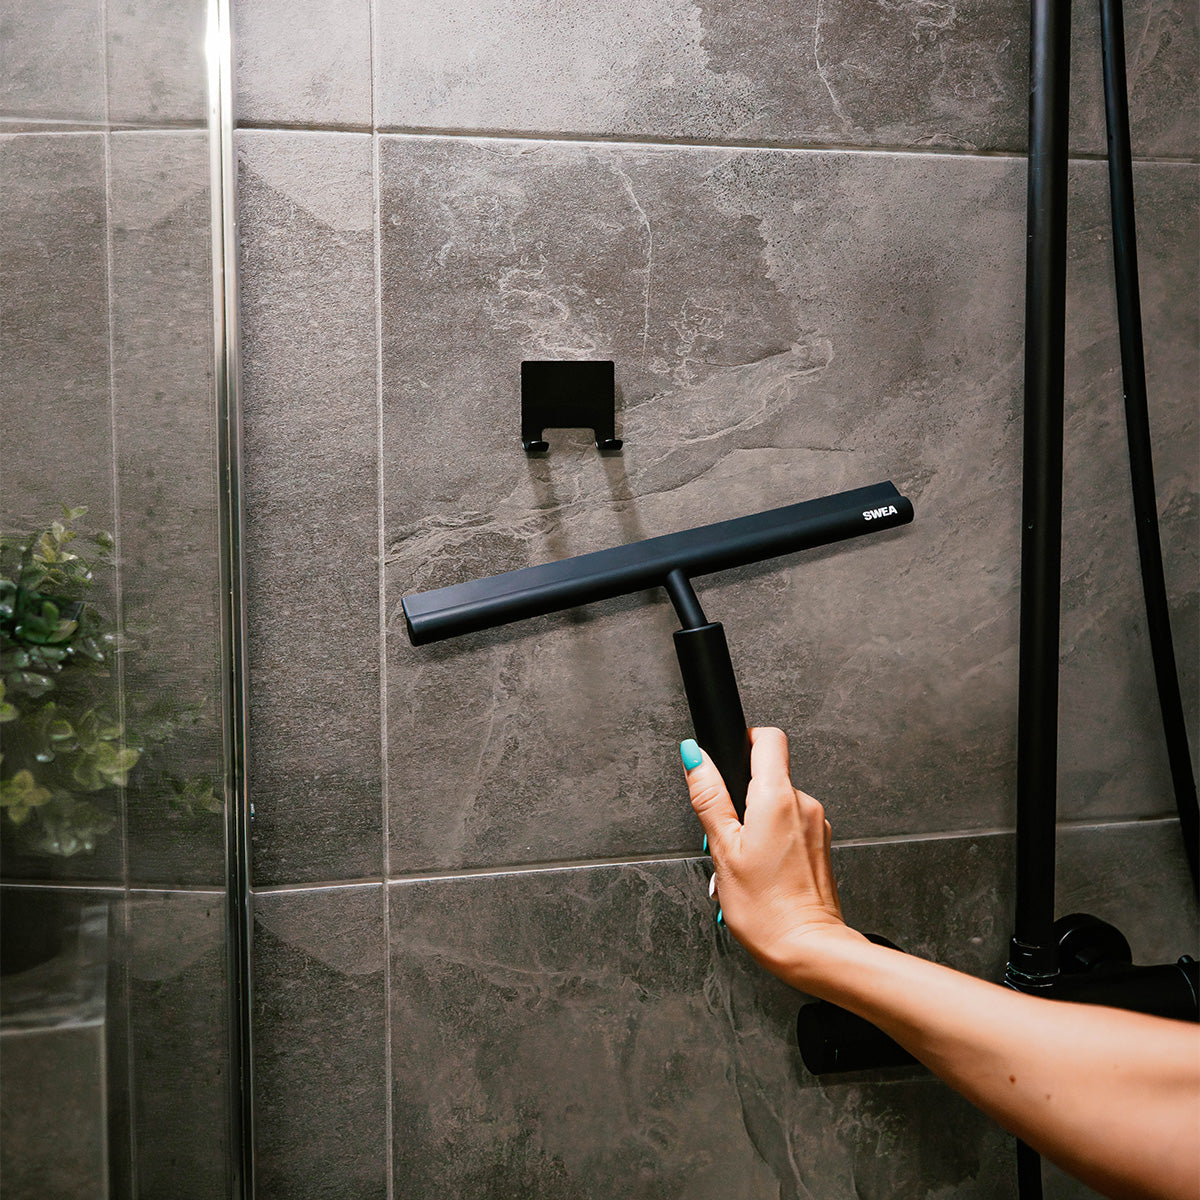 Holding the SWEA shower squeegee in a modern bathroom setting